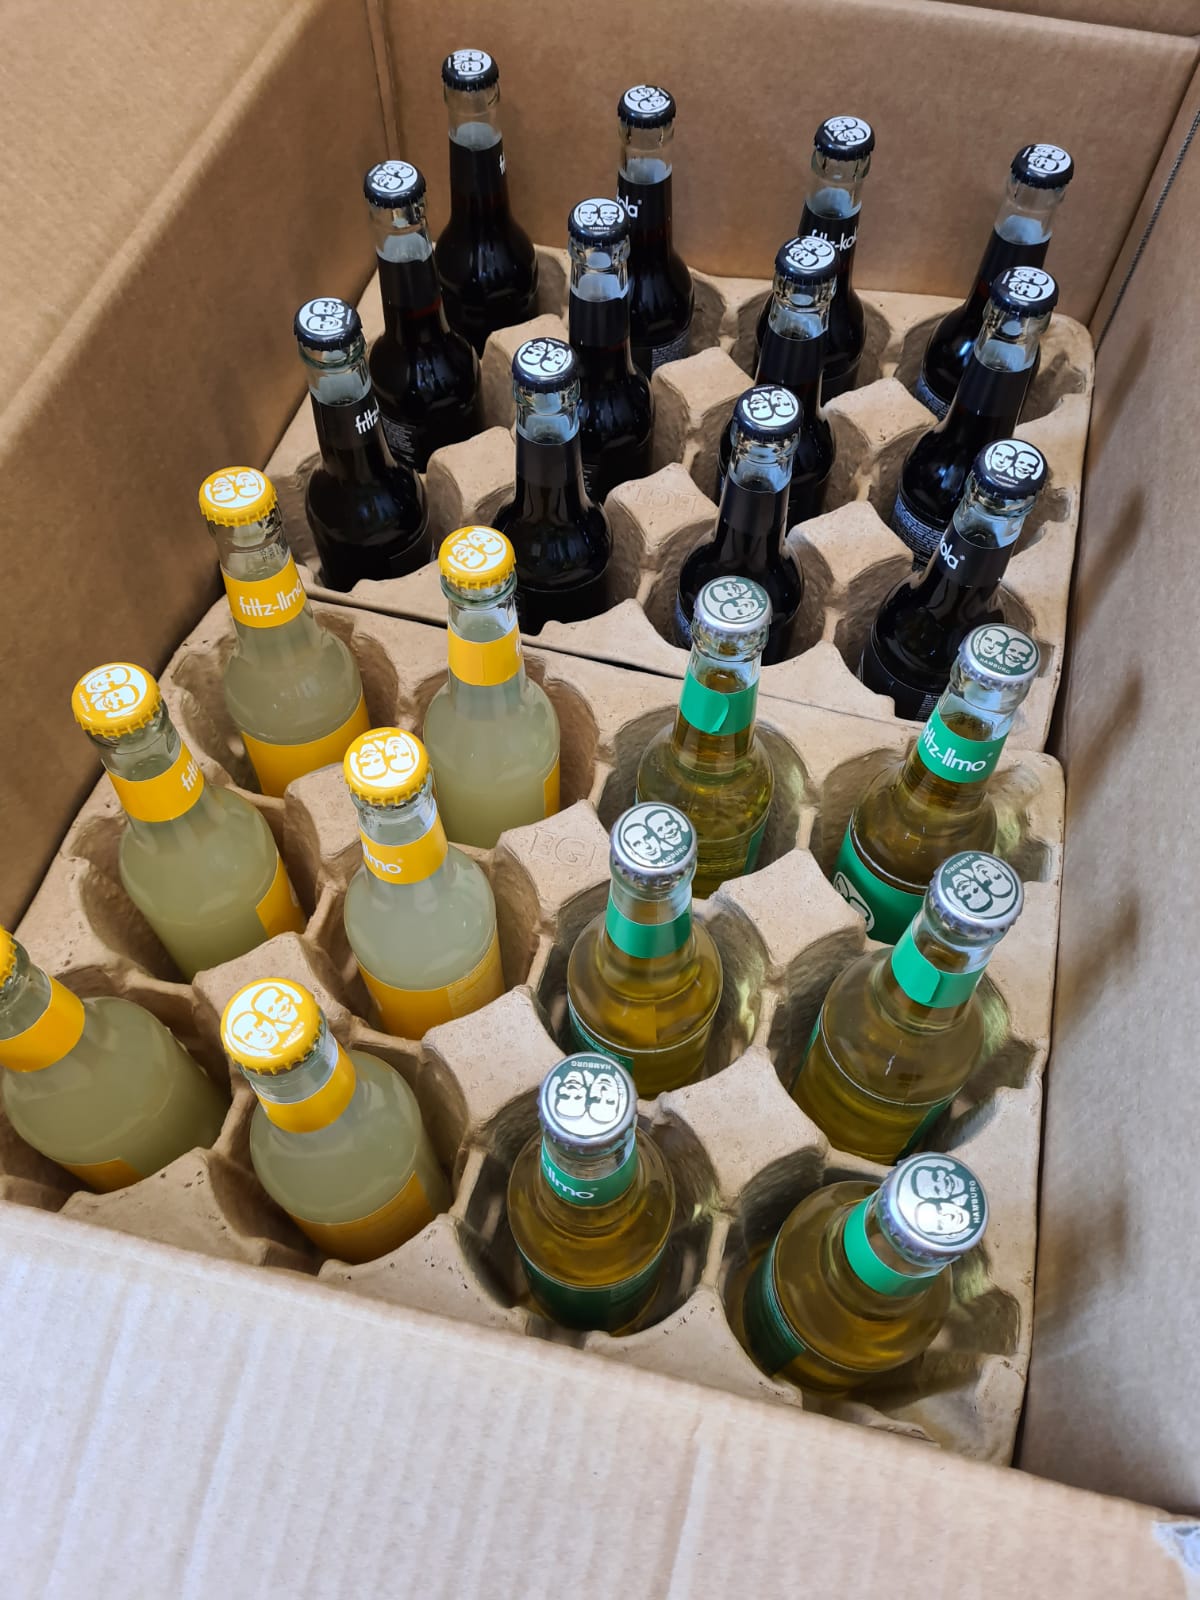 Flower Delivery Reviews / Beer bottle packing